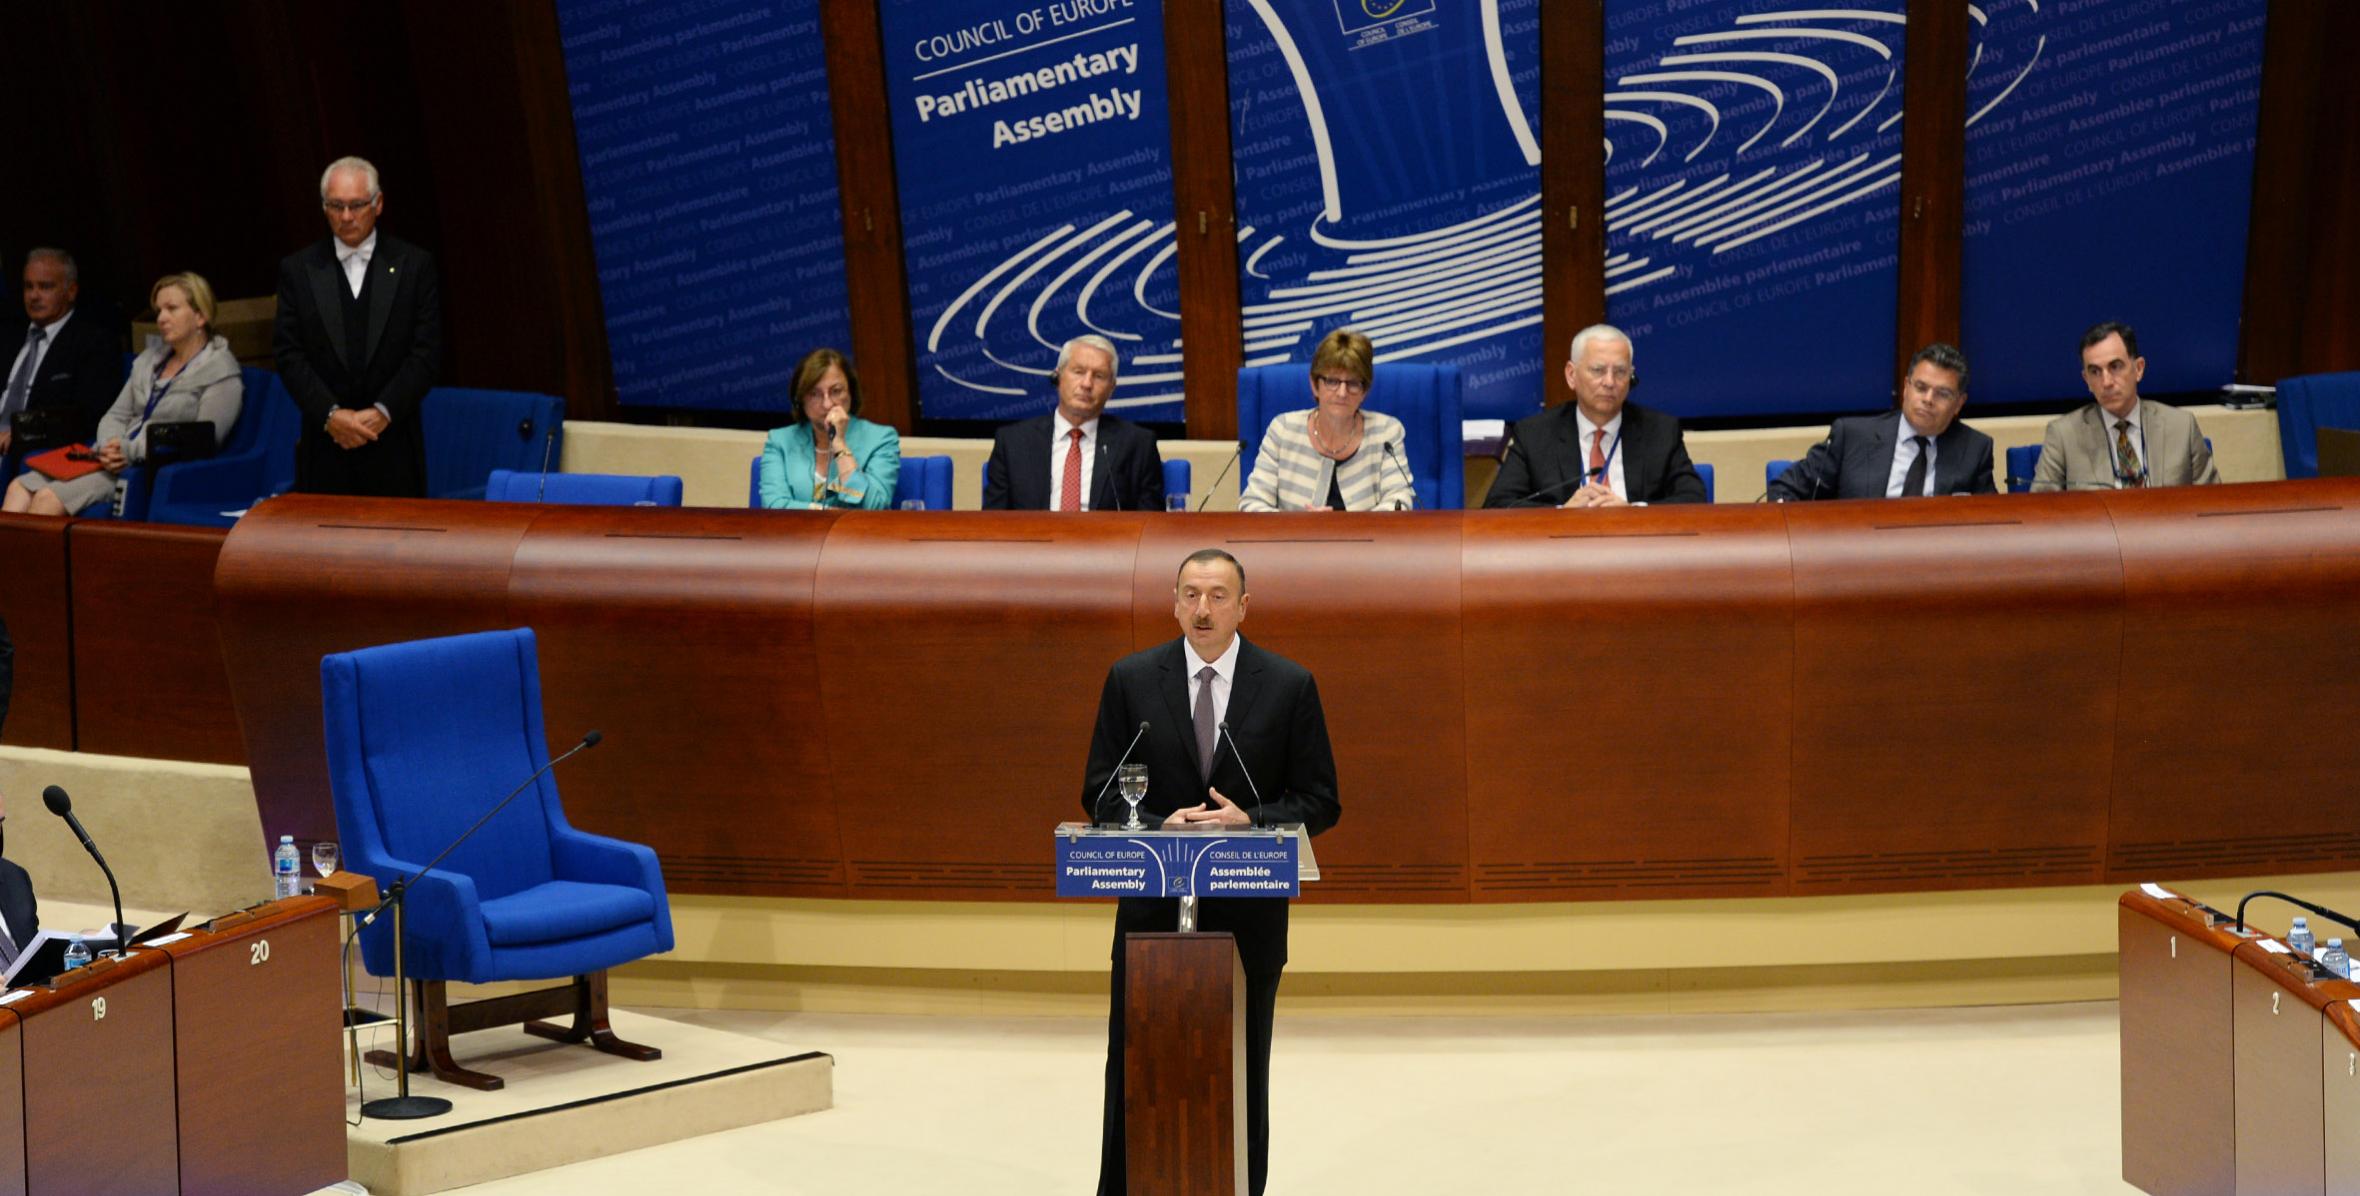 Ilham Aliyev addressed the PACE Summer Session